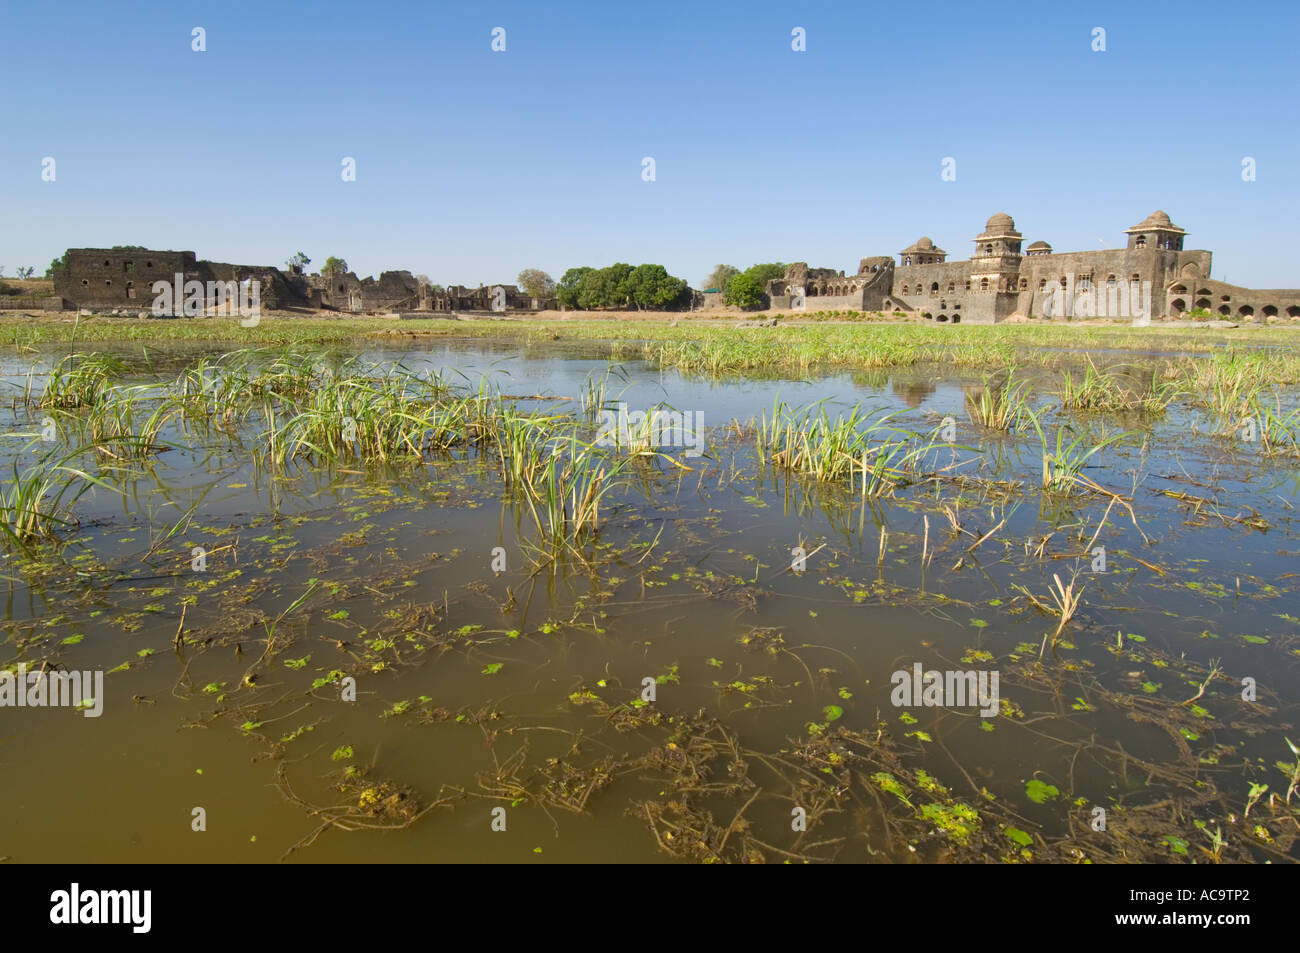 A wide angle view across one of the man-made lakes (Kapur Talao) of the Royal Enclave and the Ship's Palace (Jahaz Mahal). Stock Photo